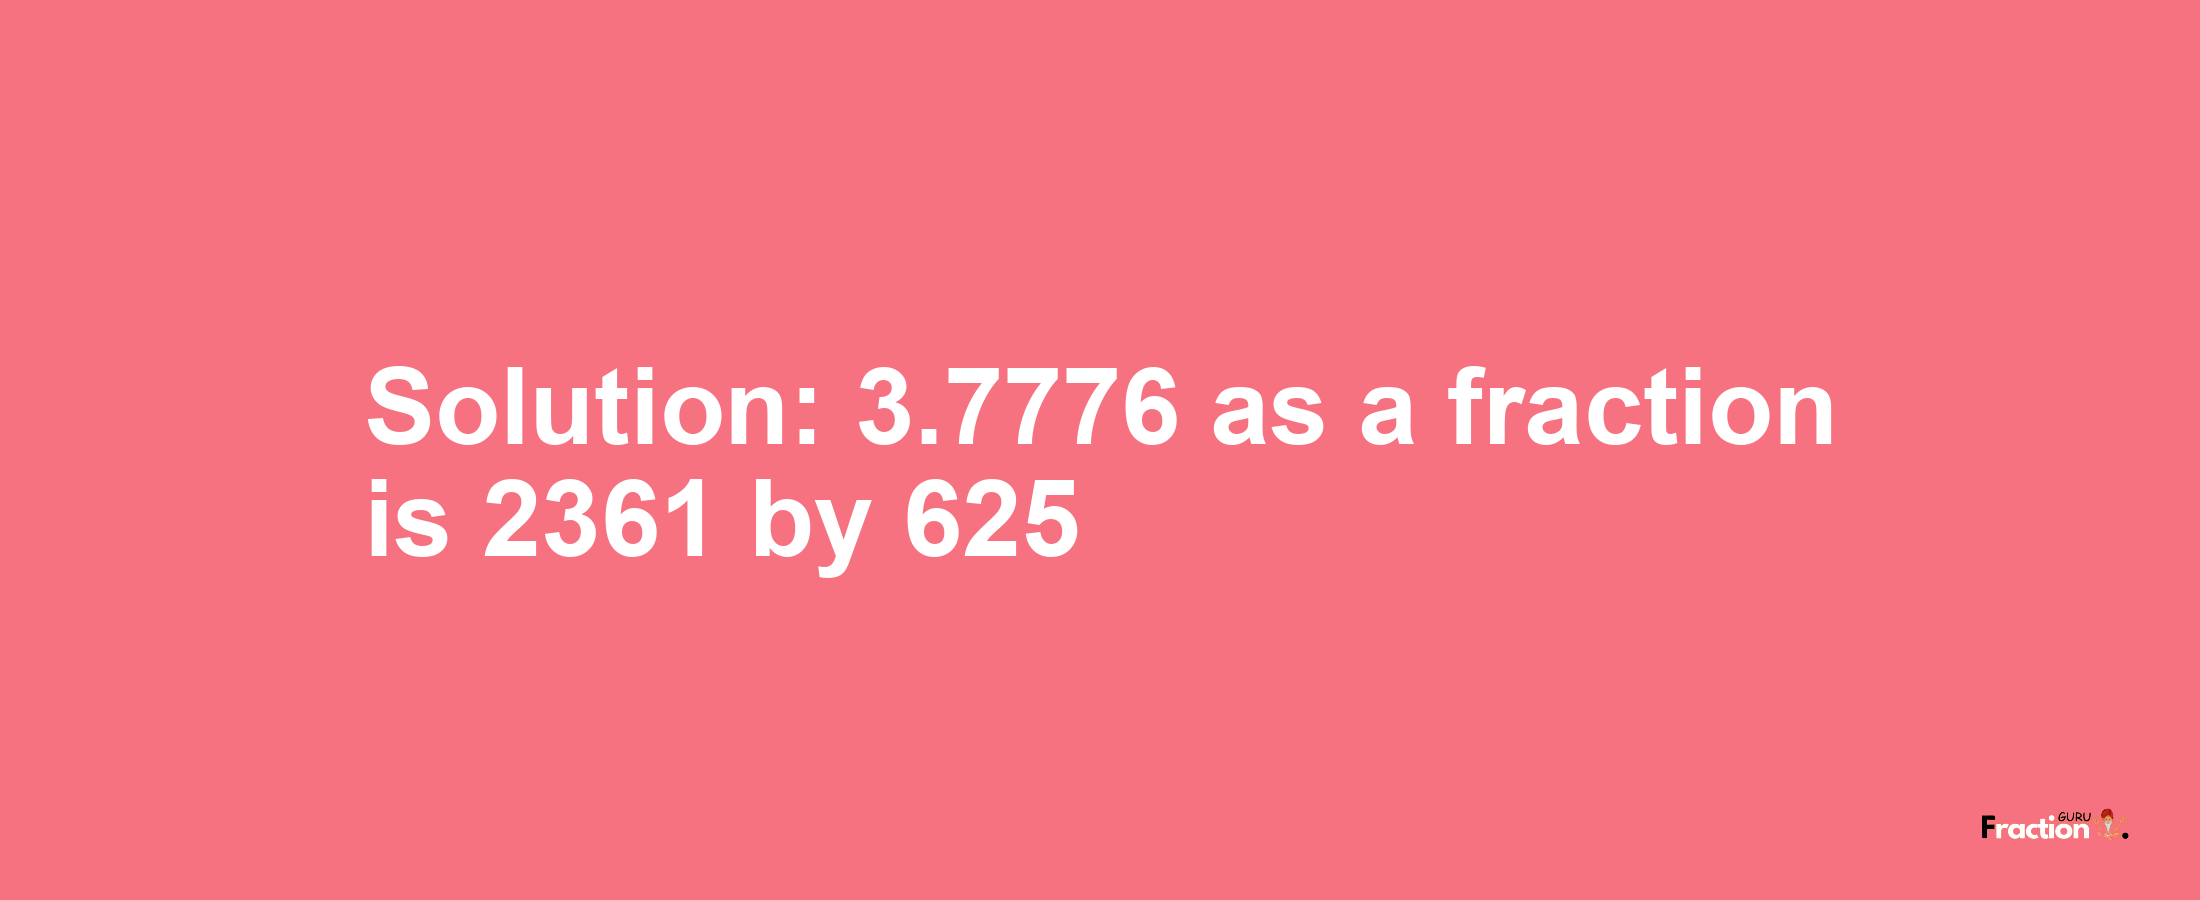 Solution:3.7776 as a fraction is 2361/625